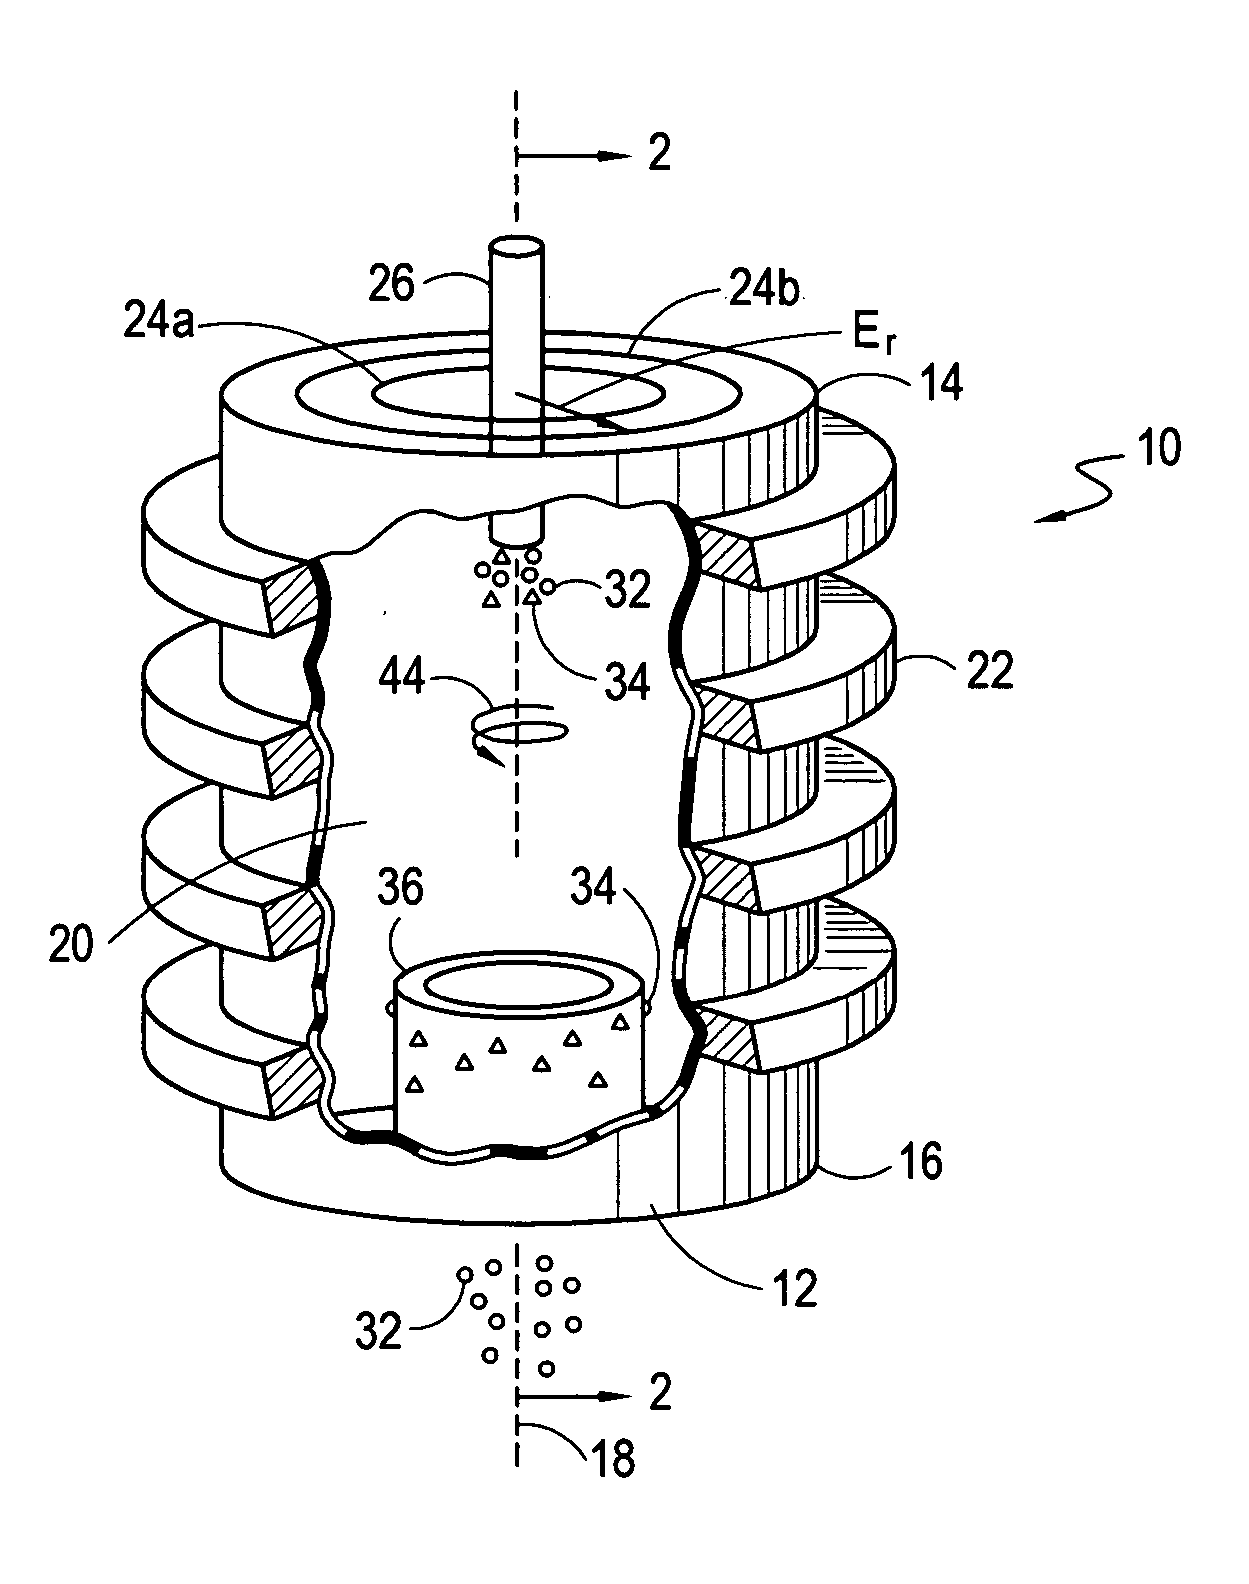 Mass separator with controlled input